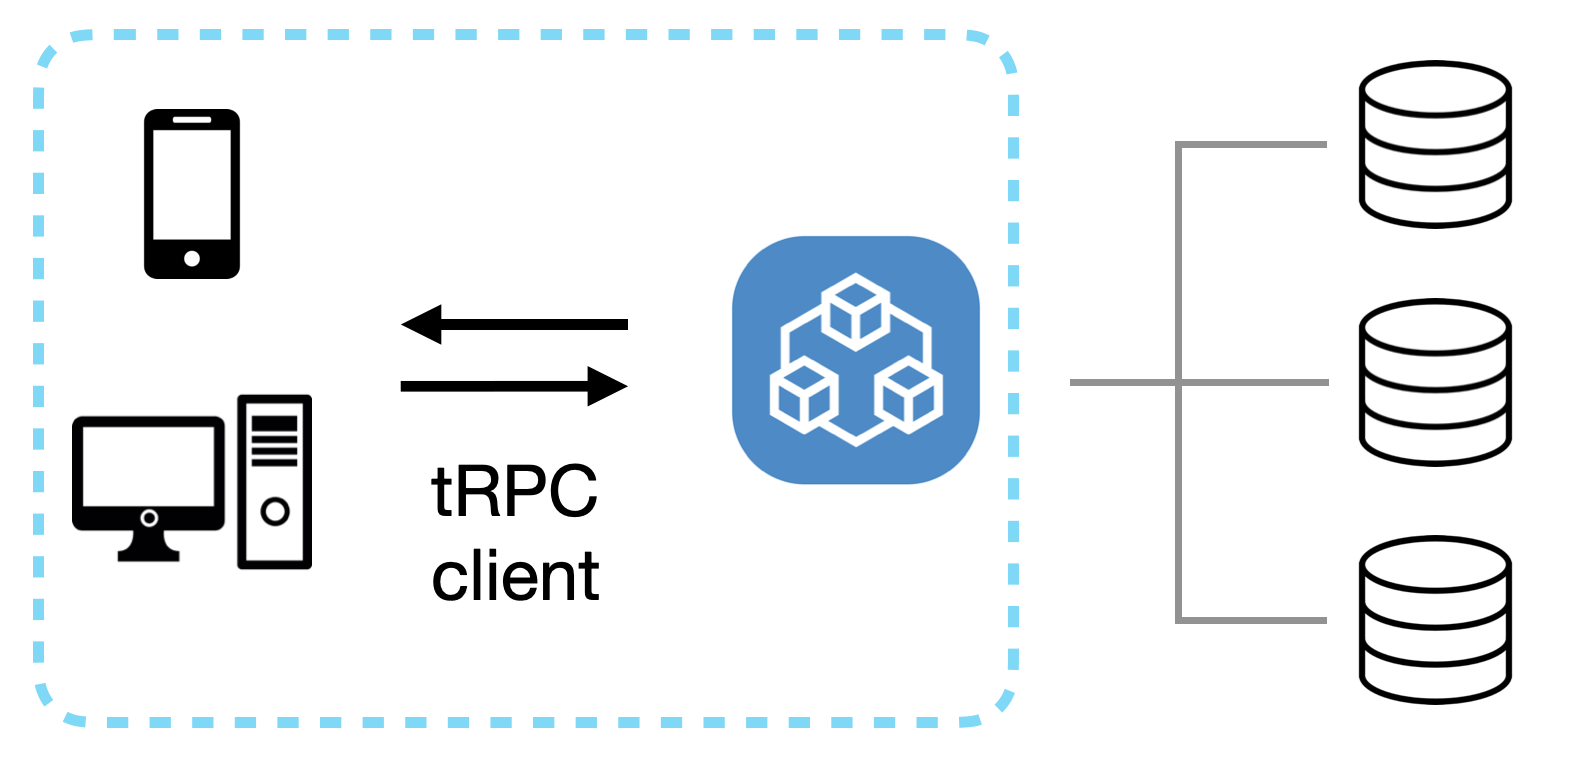 tRPC overview